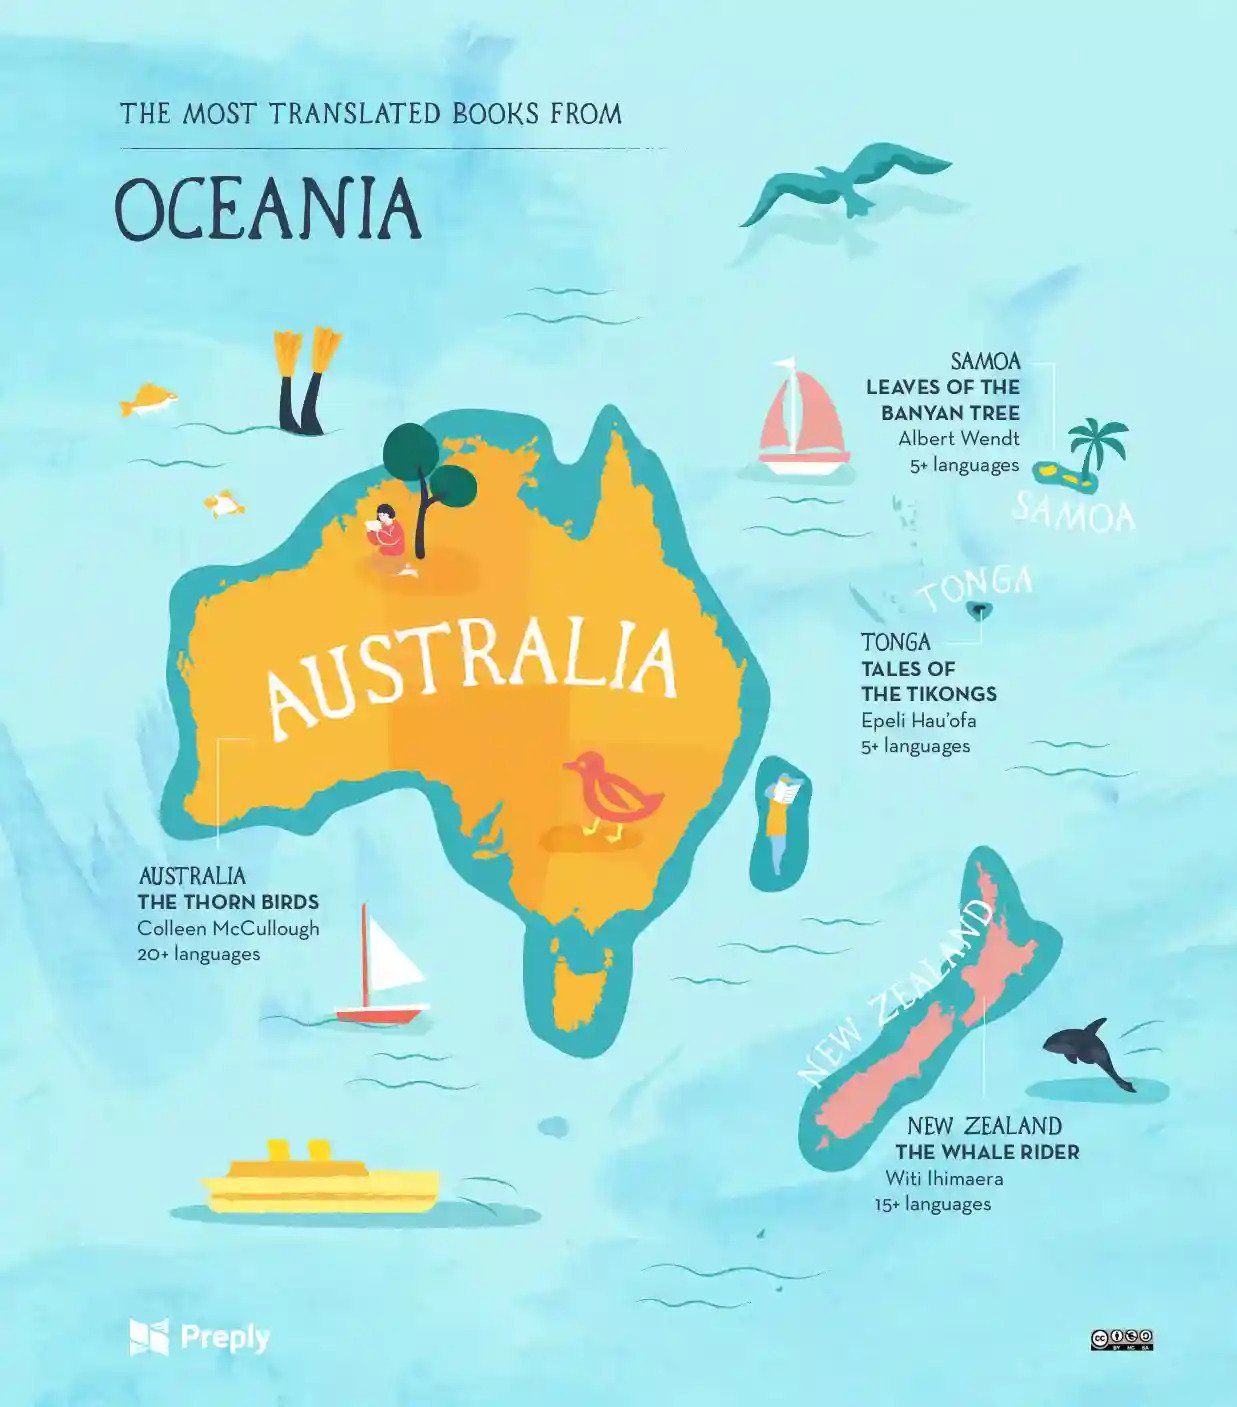 The Most Translated Books From Oceania map